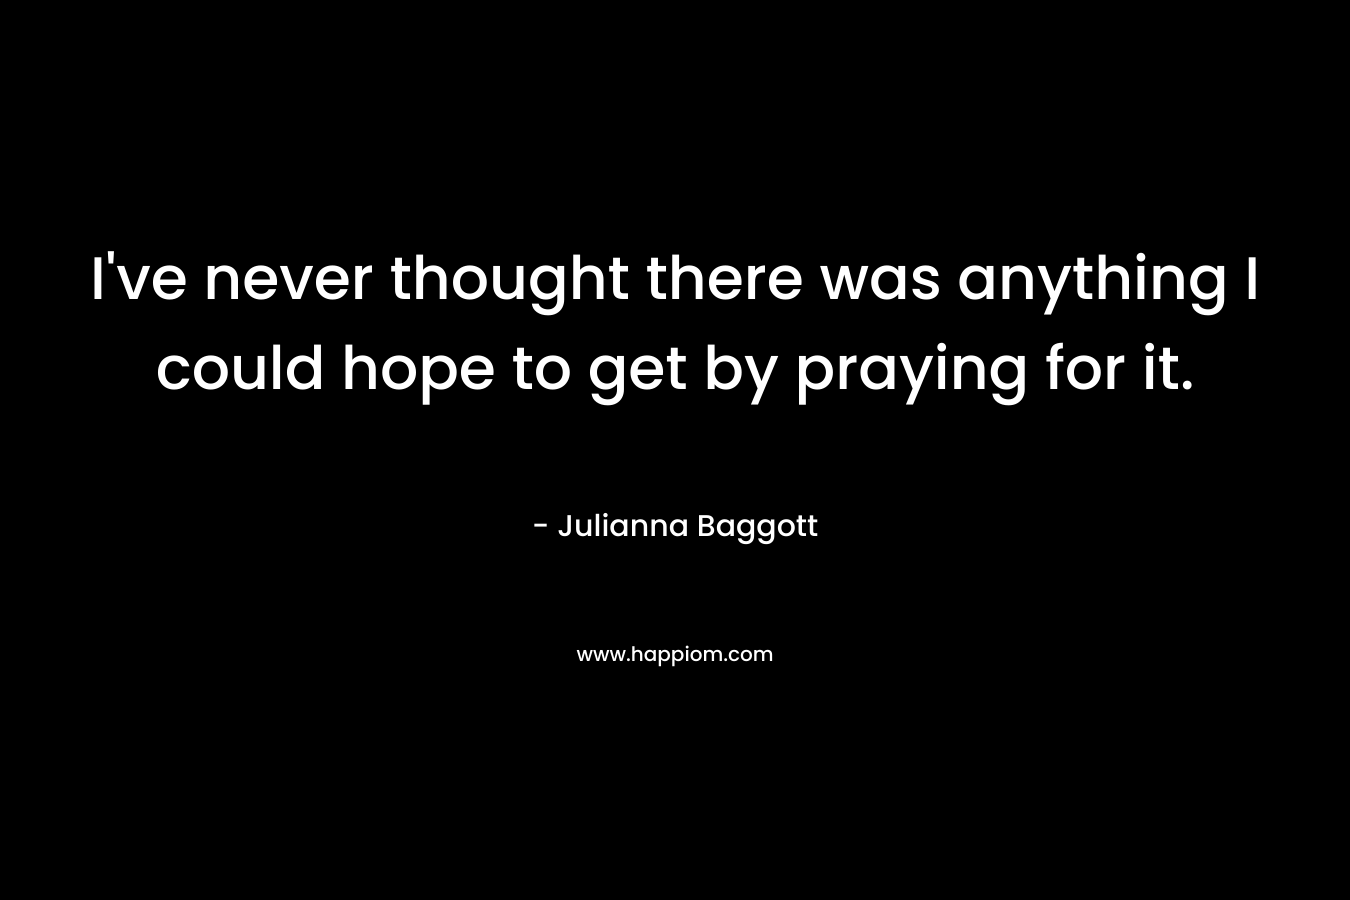 I’ve never thought there was anything I could hope to get by praying for it. – Julianna Baggott